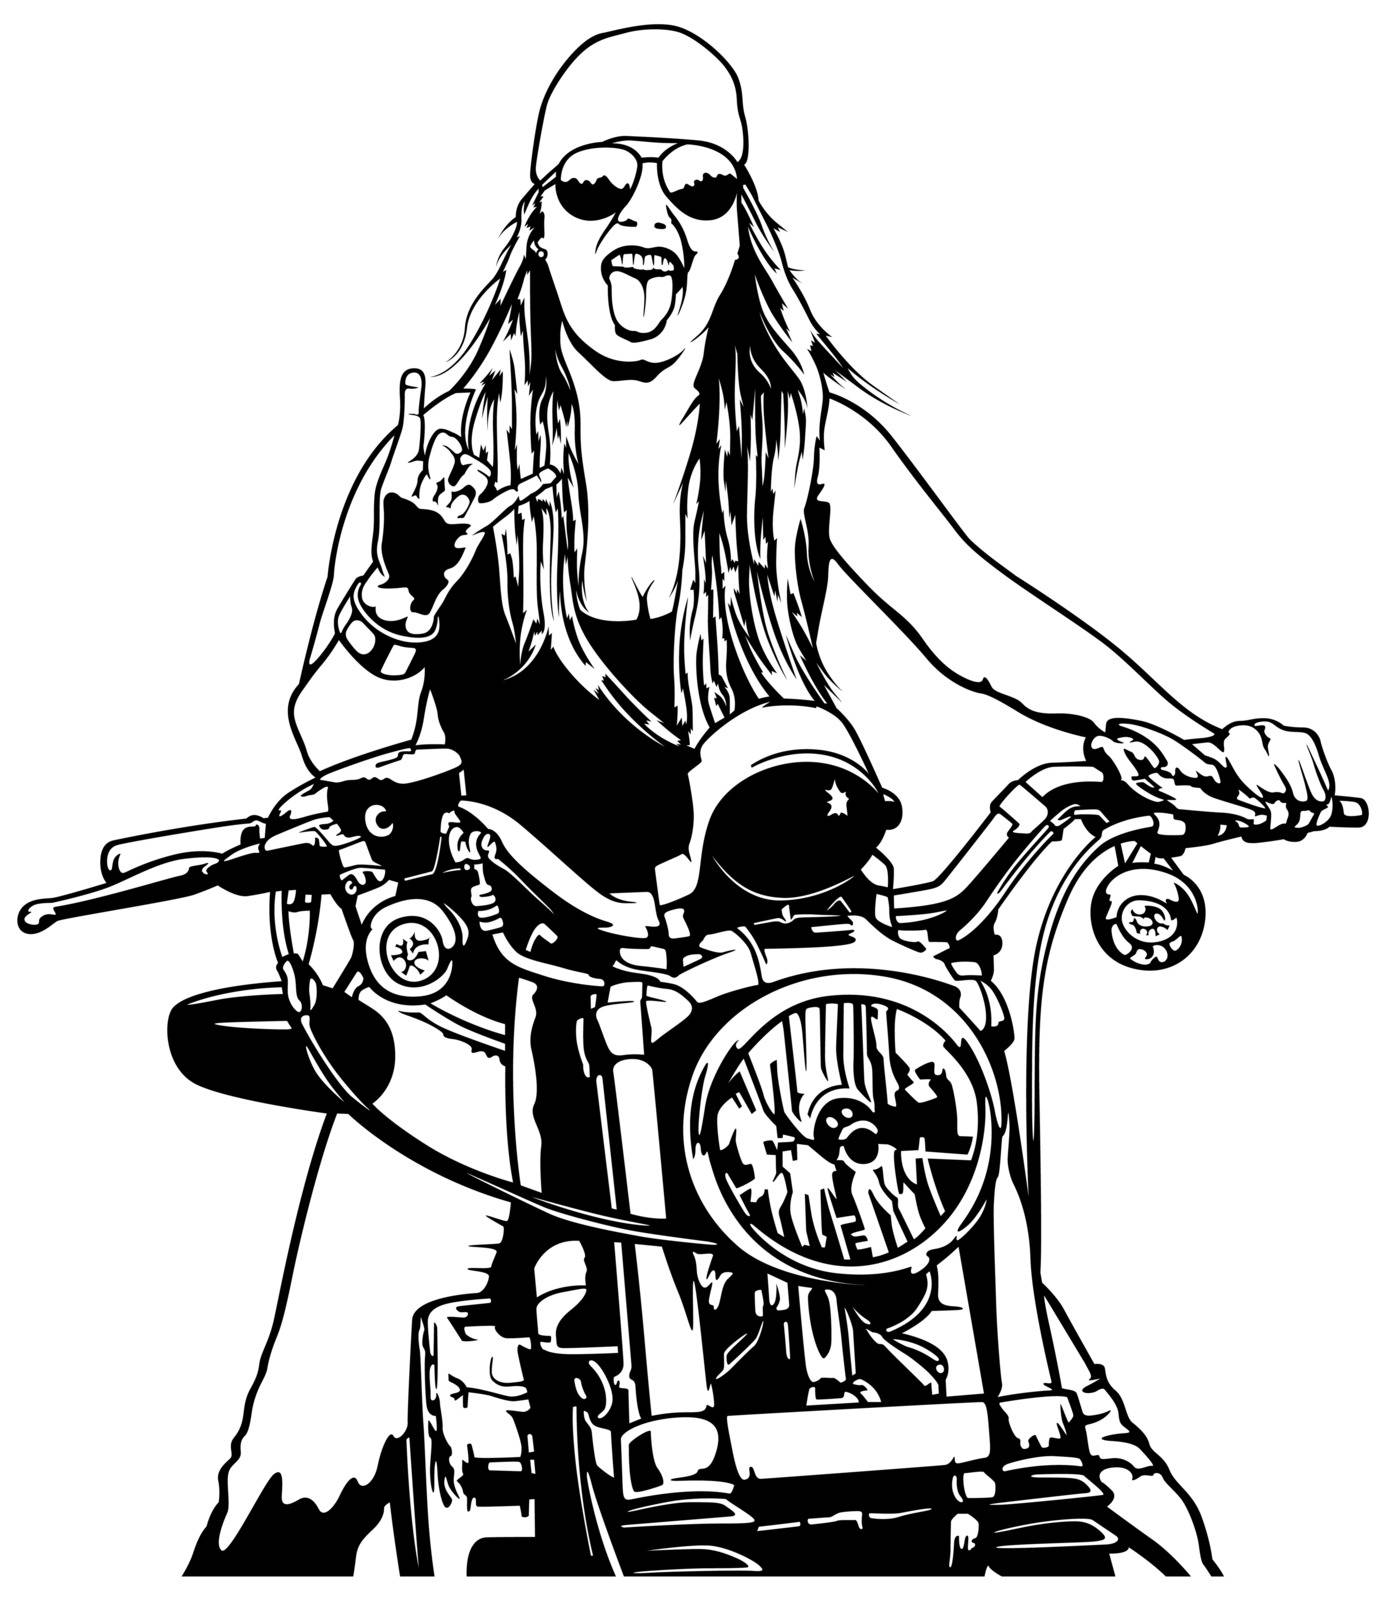 Woman Motorcyclist - Black and White Outline Illustration with Female Rider on Motorcycle, Vector